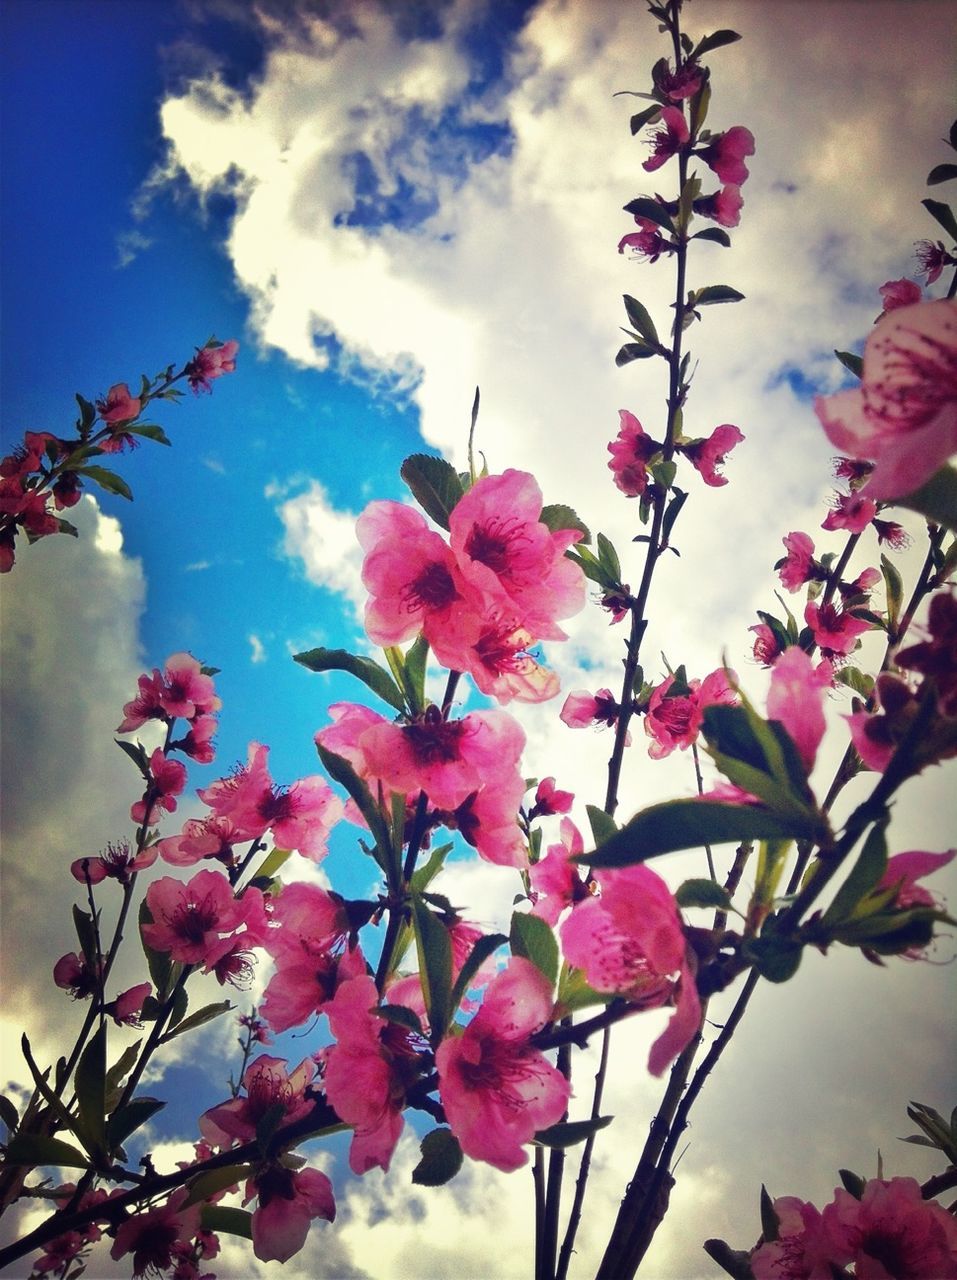 flower, freshness, pink color, fragility, growth, petal, low angle view, sky, beauty in nature, nature, blooming, blossom, flower head, cloud - sky, in bloom, branch, pink, plant, close-up, day